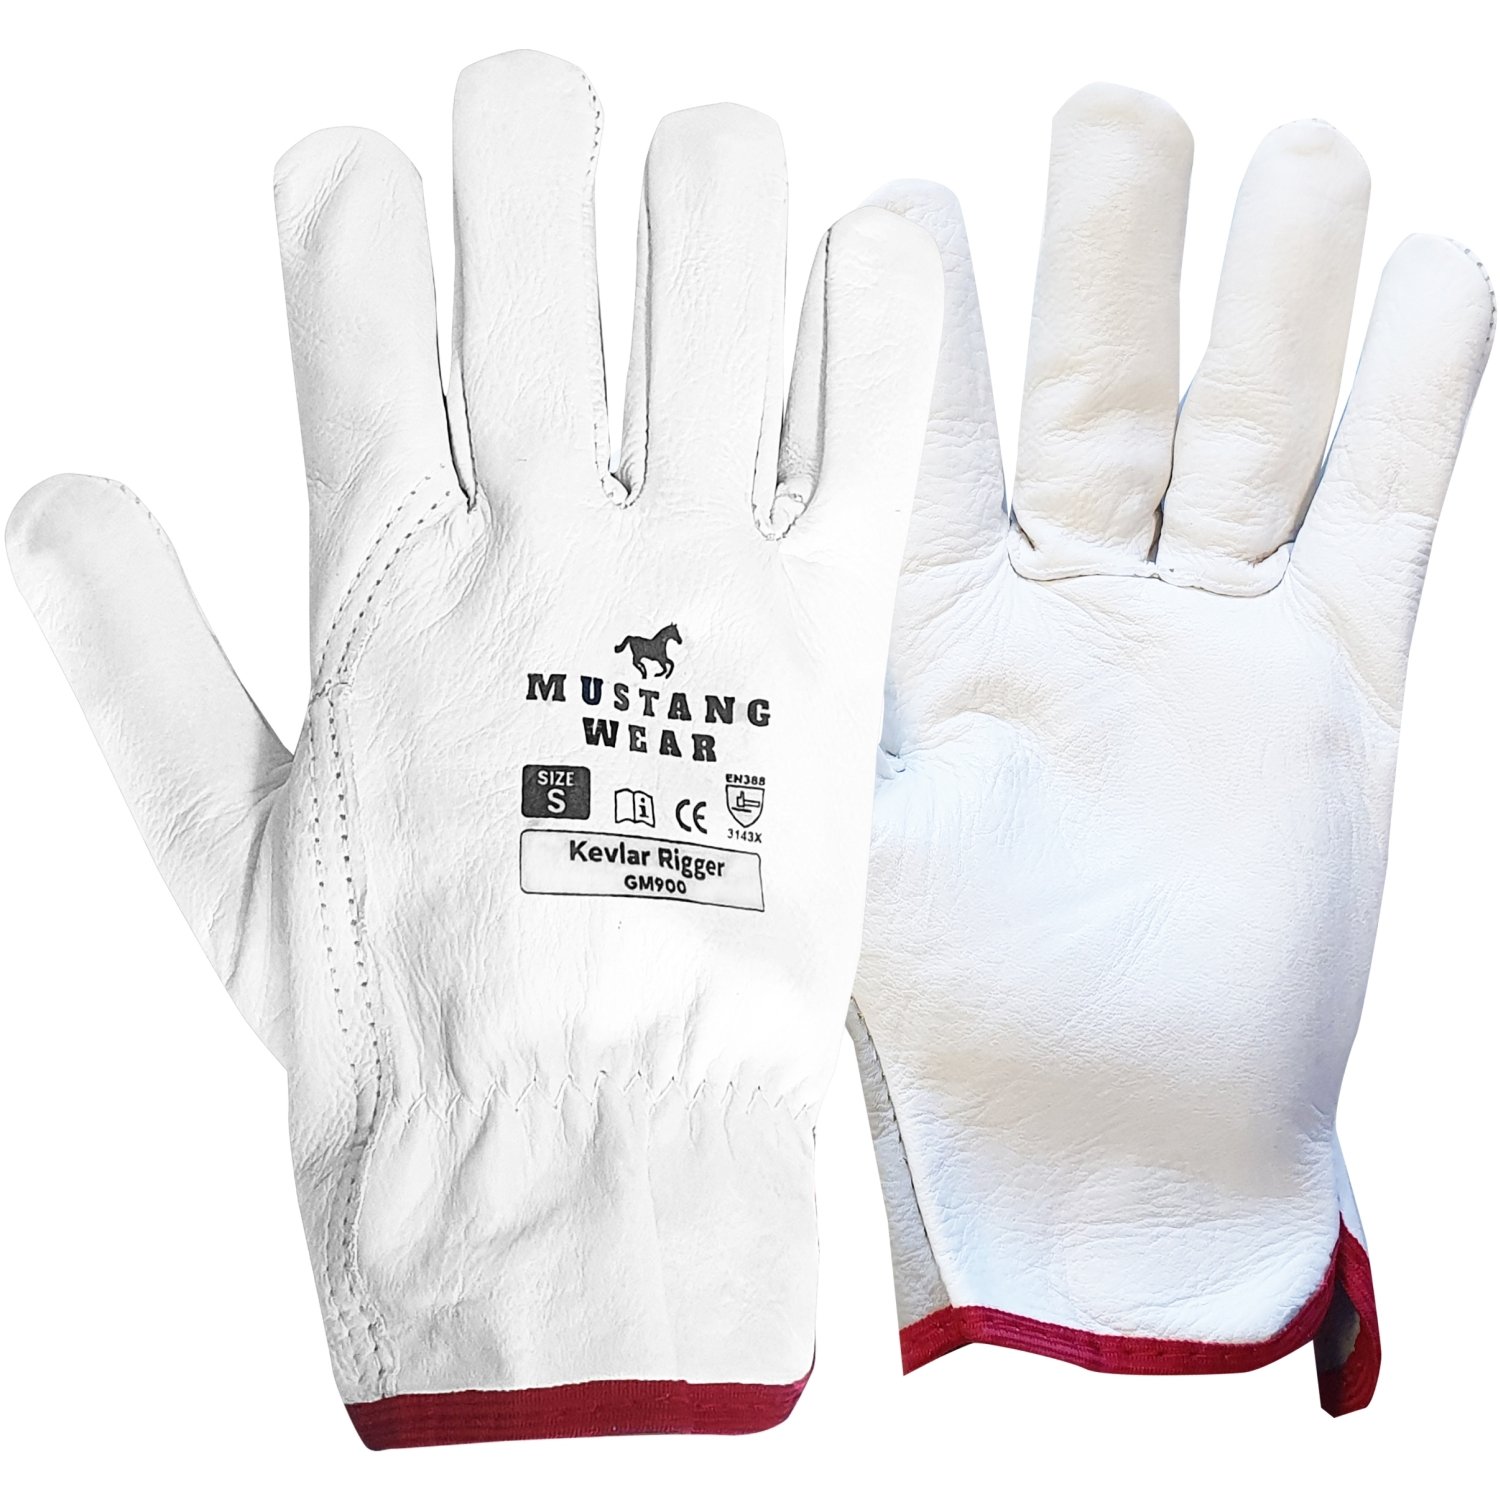 Mustang Wear Premium Leather Rigger Glove (Pkt 12)